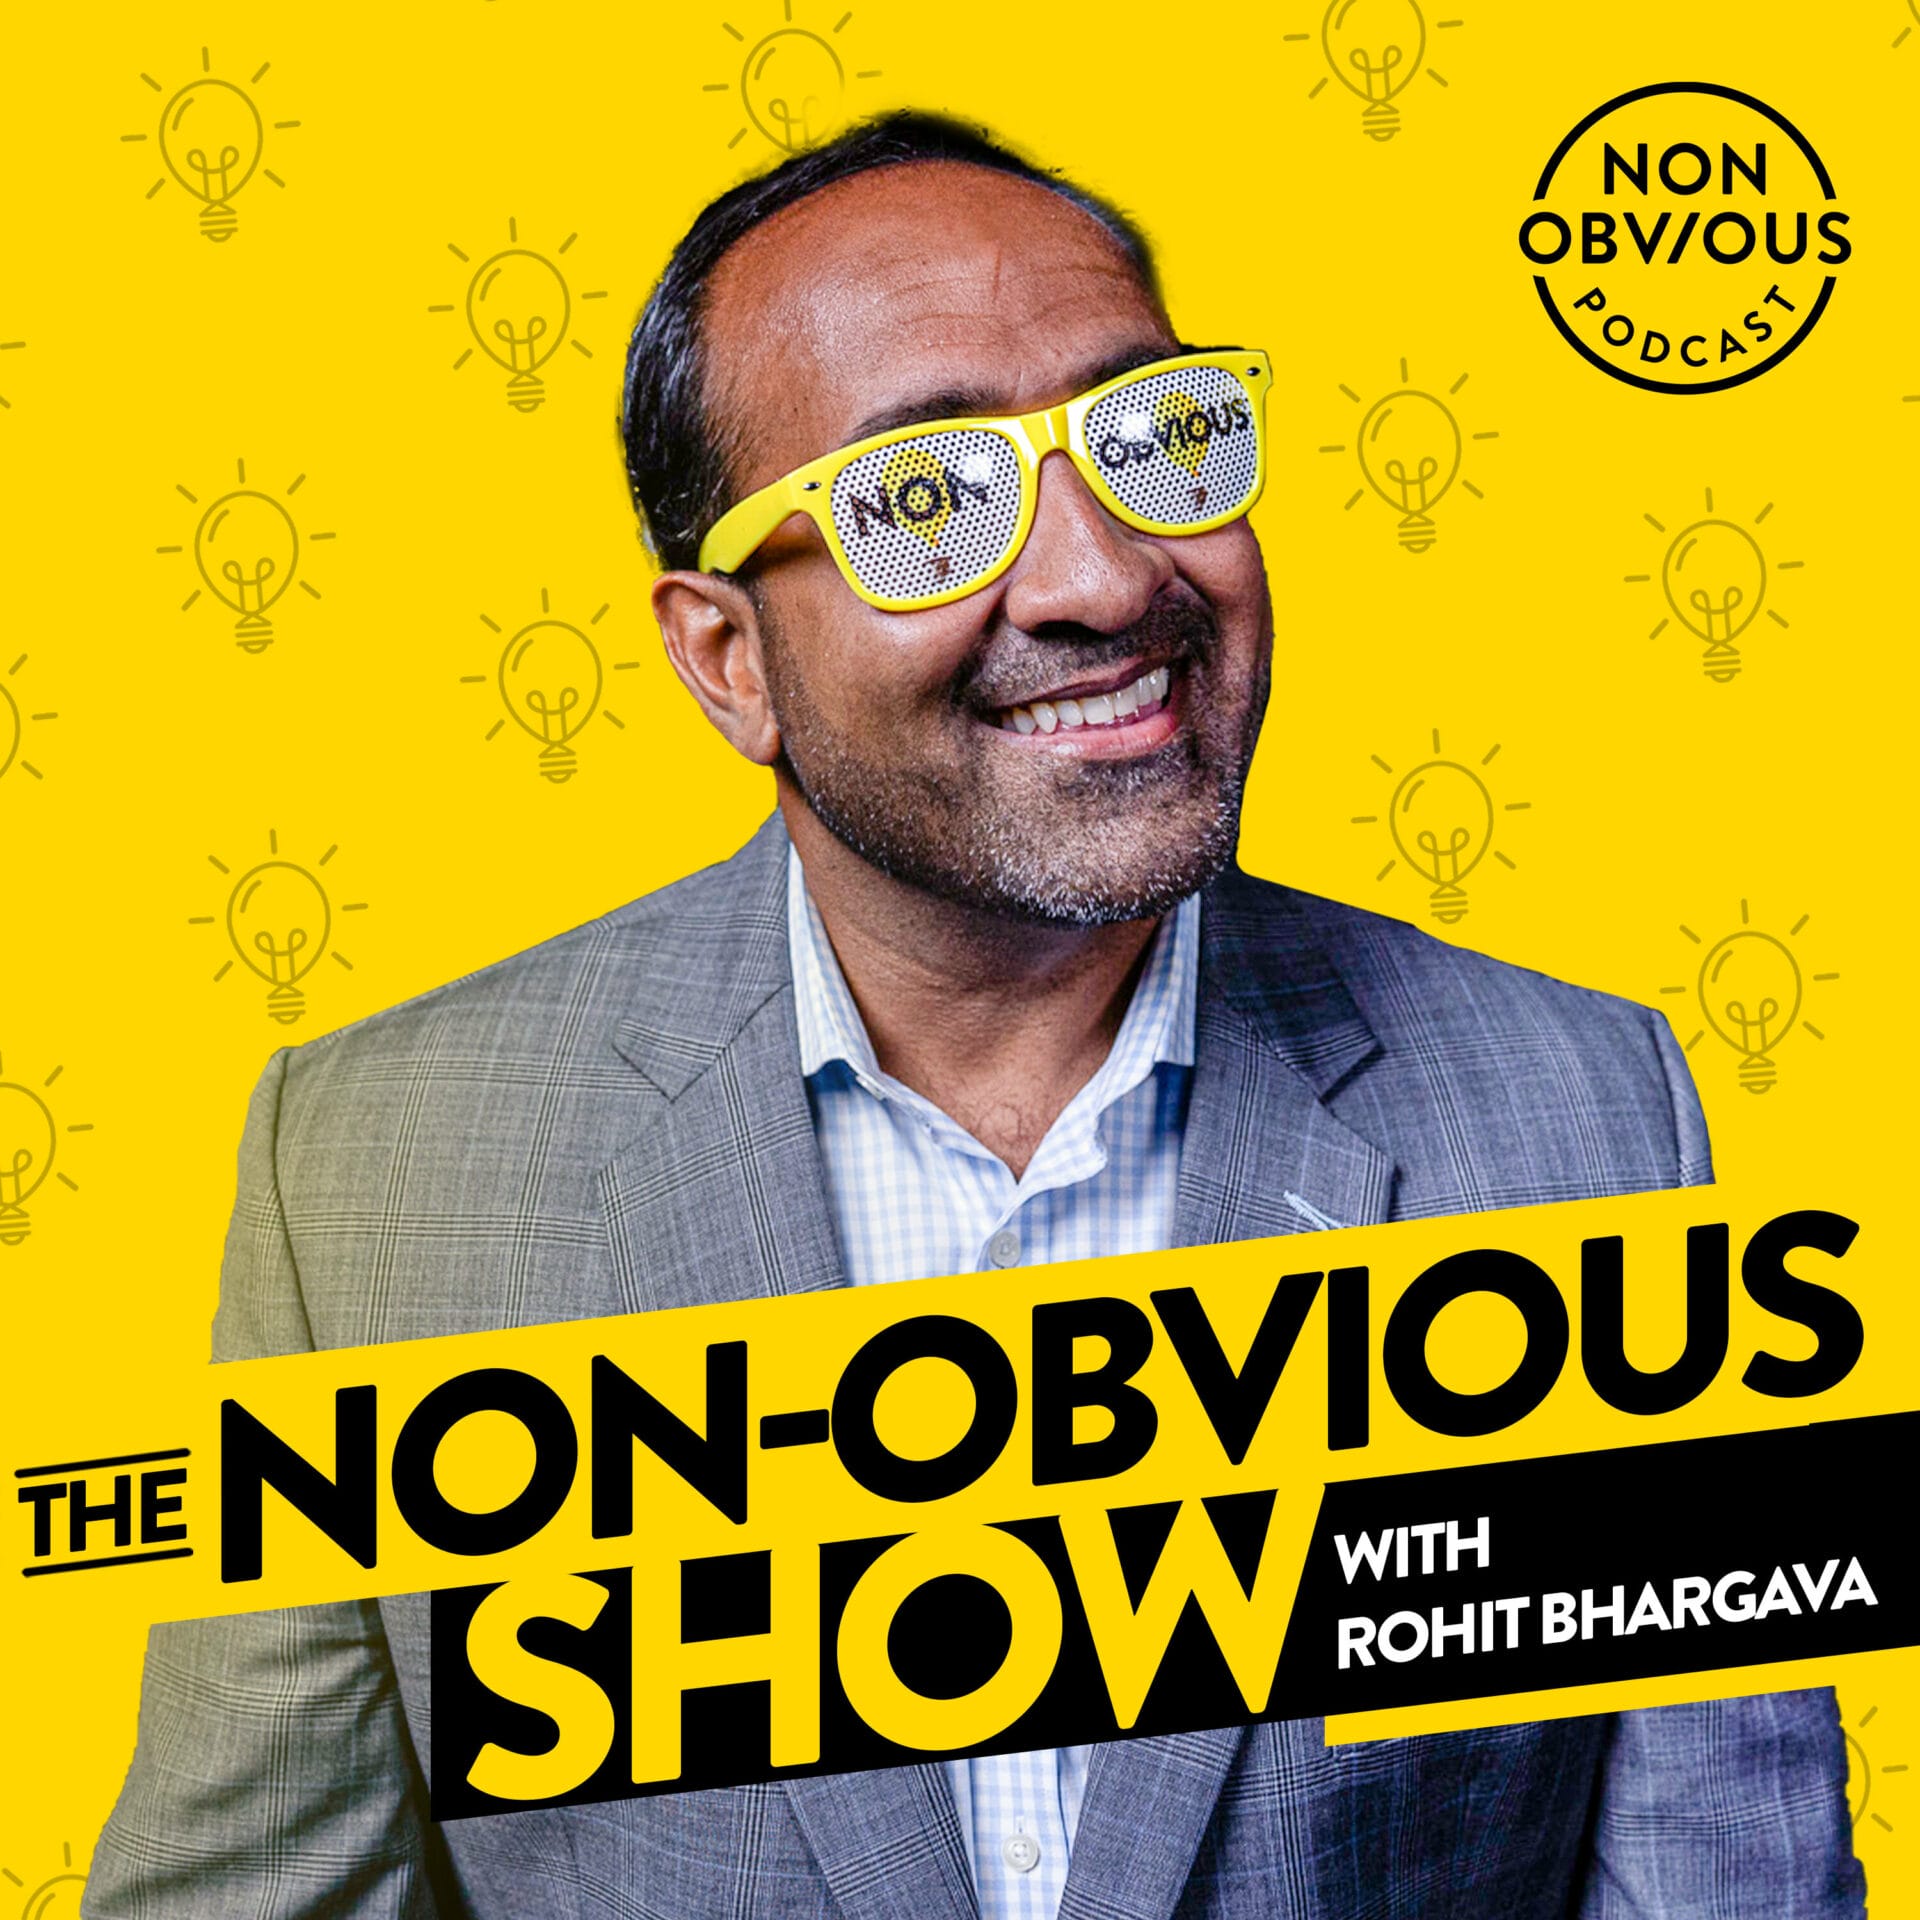 The-Non-Obvious-Show-Podcast-final